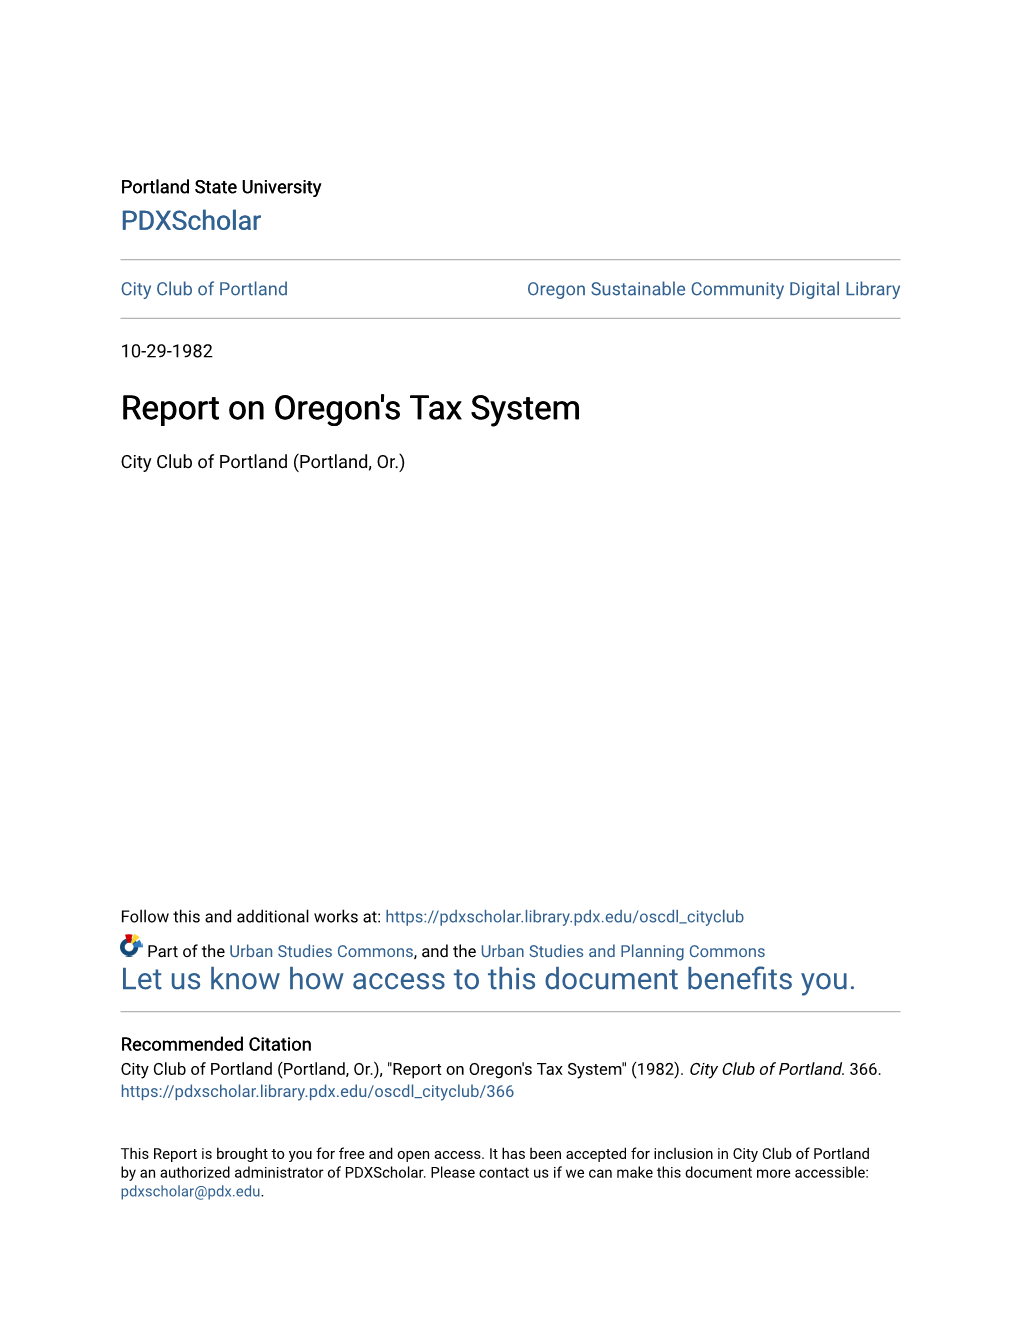 Report on Oregon's Tax System